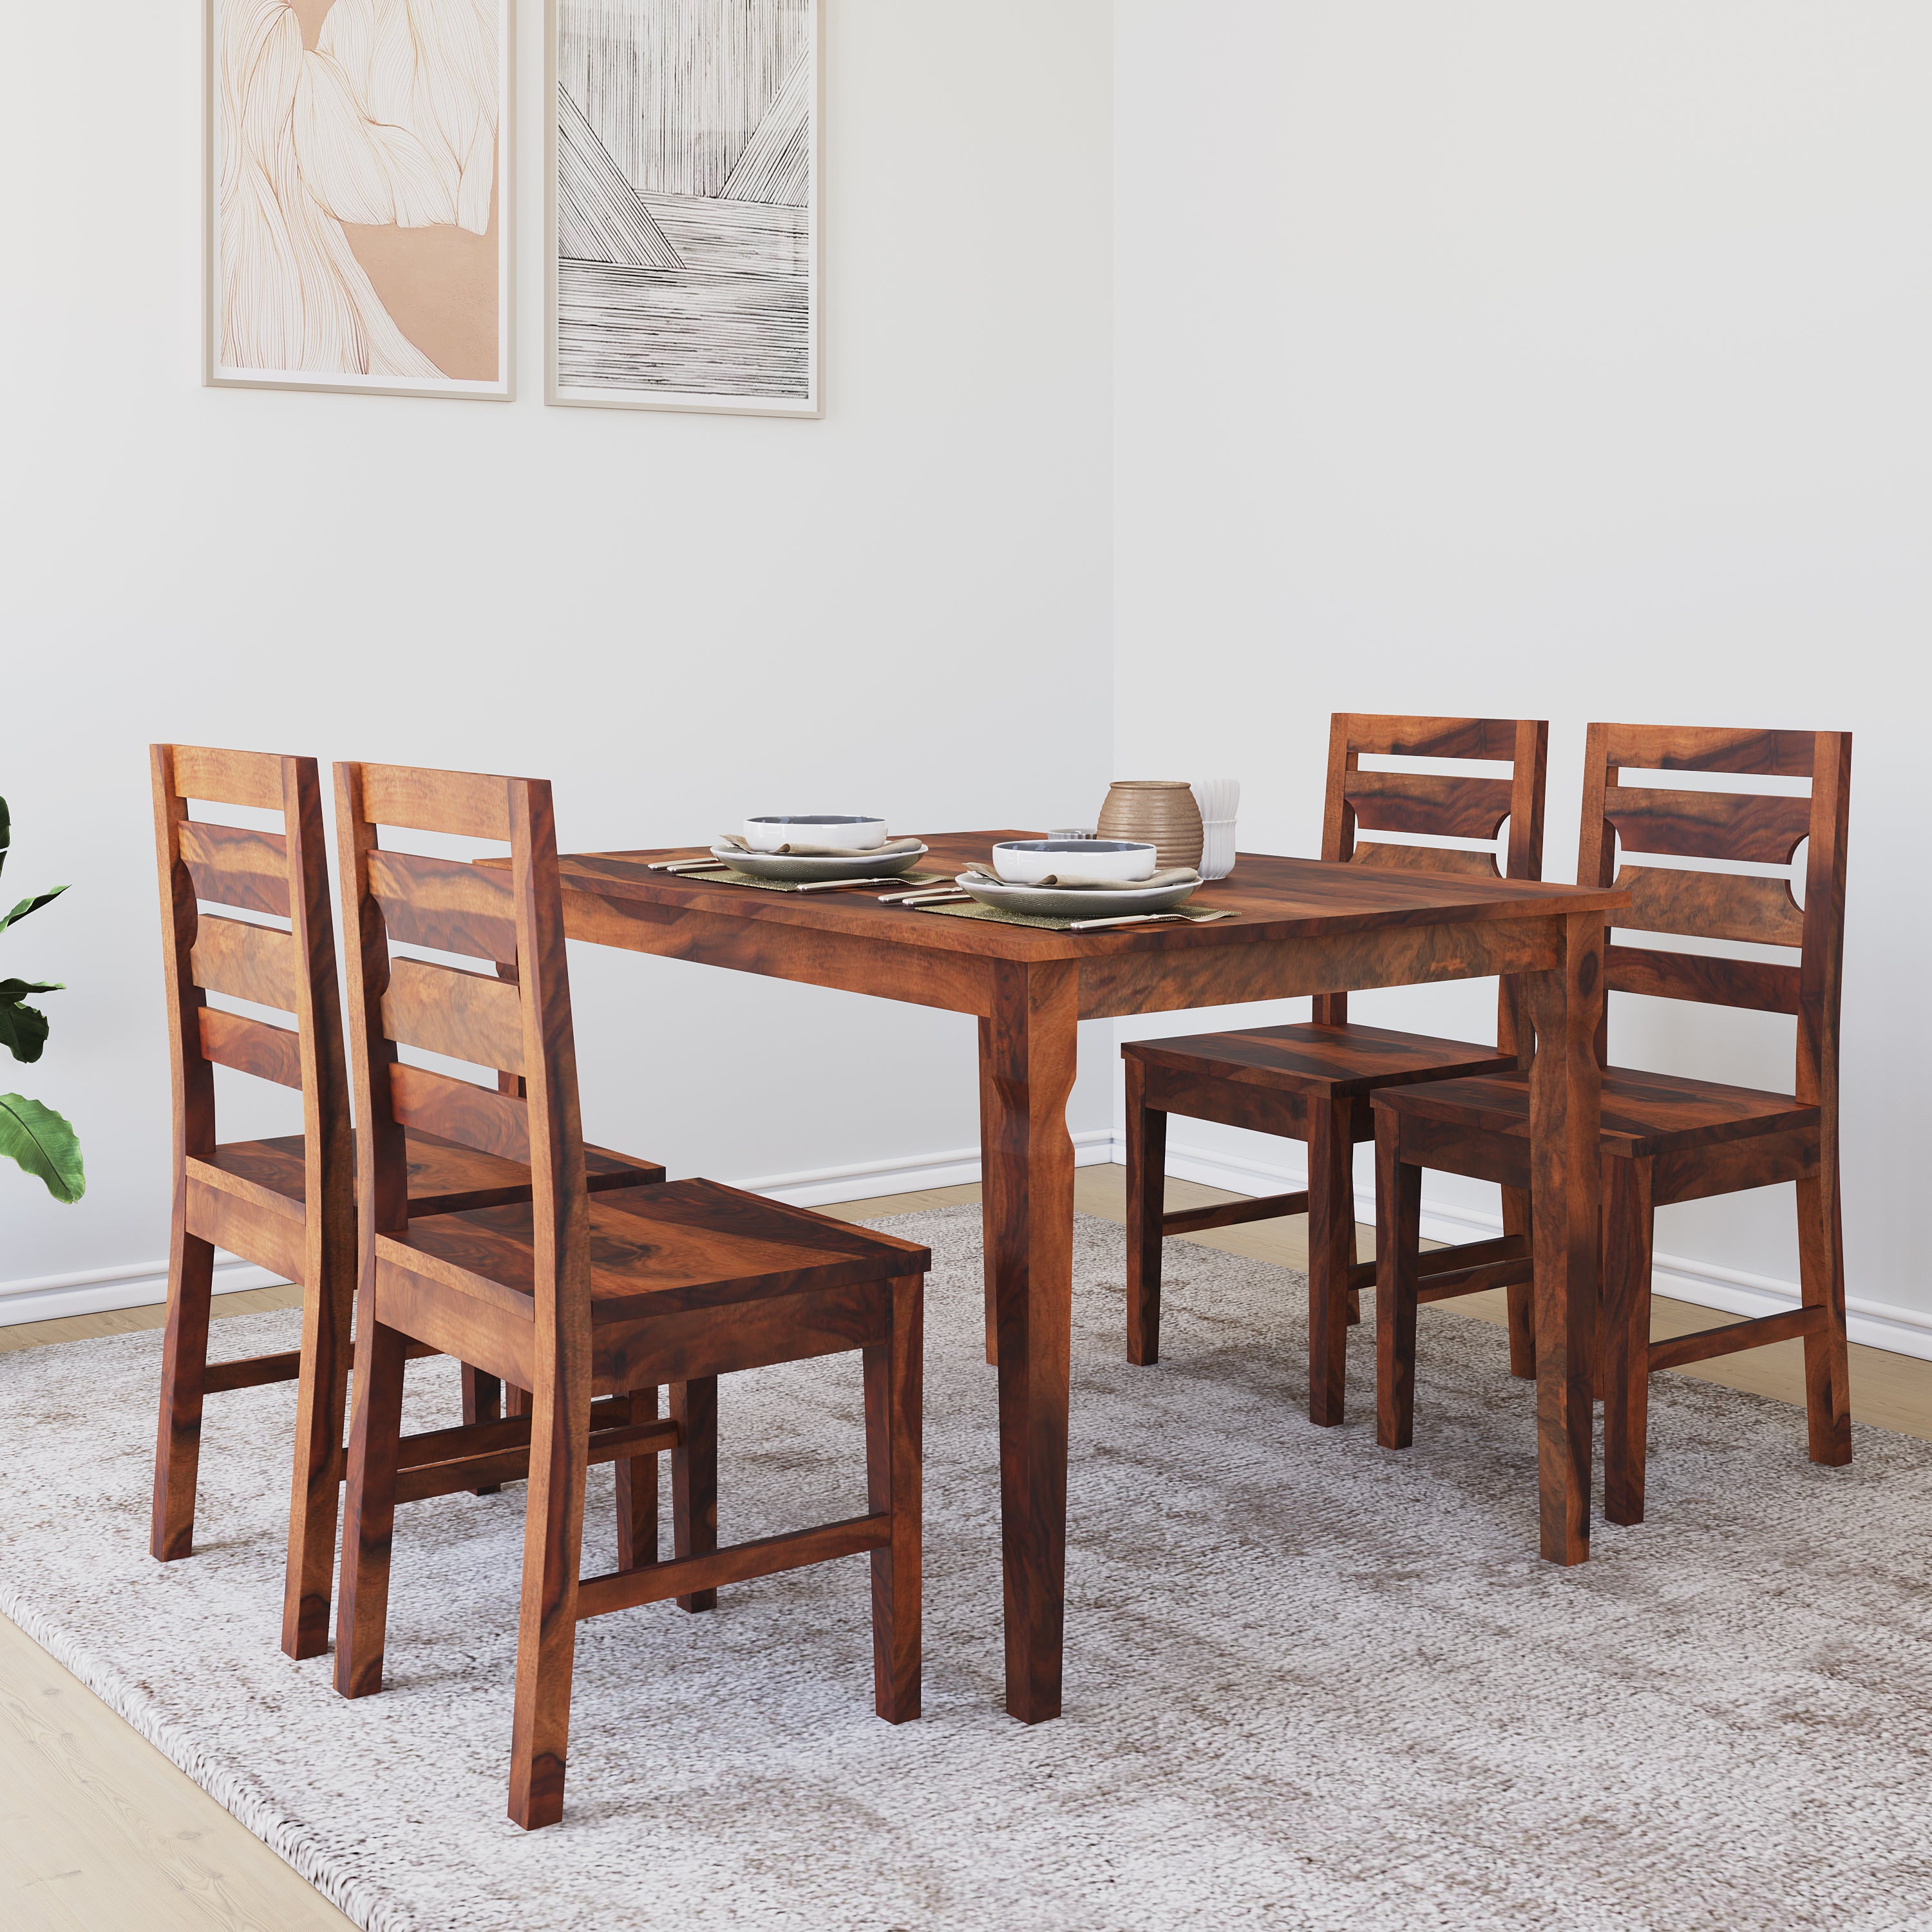 Europa Solid Wood 4 Steater Dining Set (Walnut)